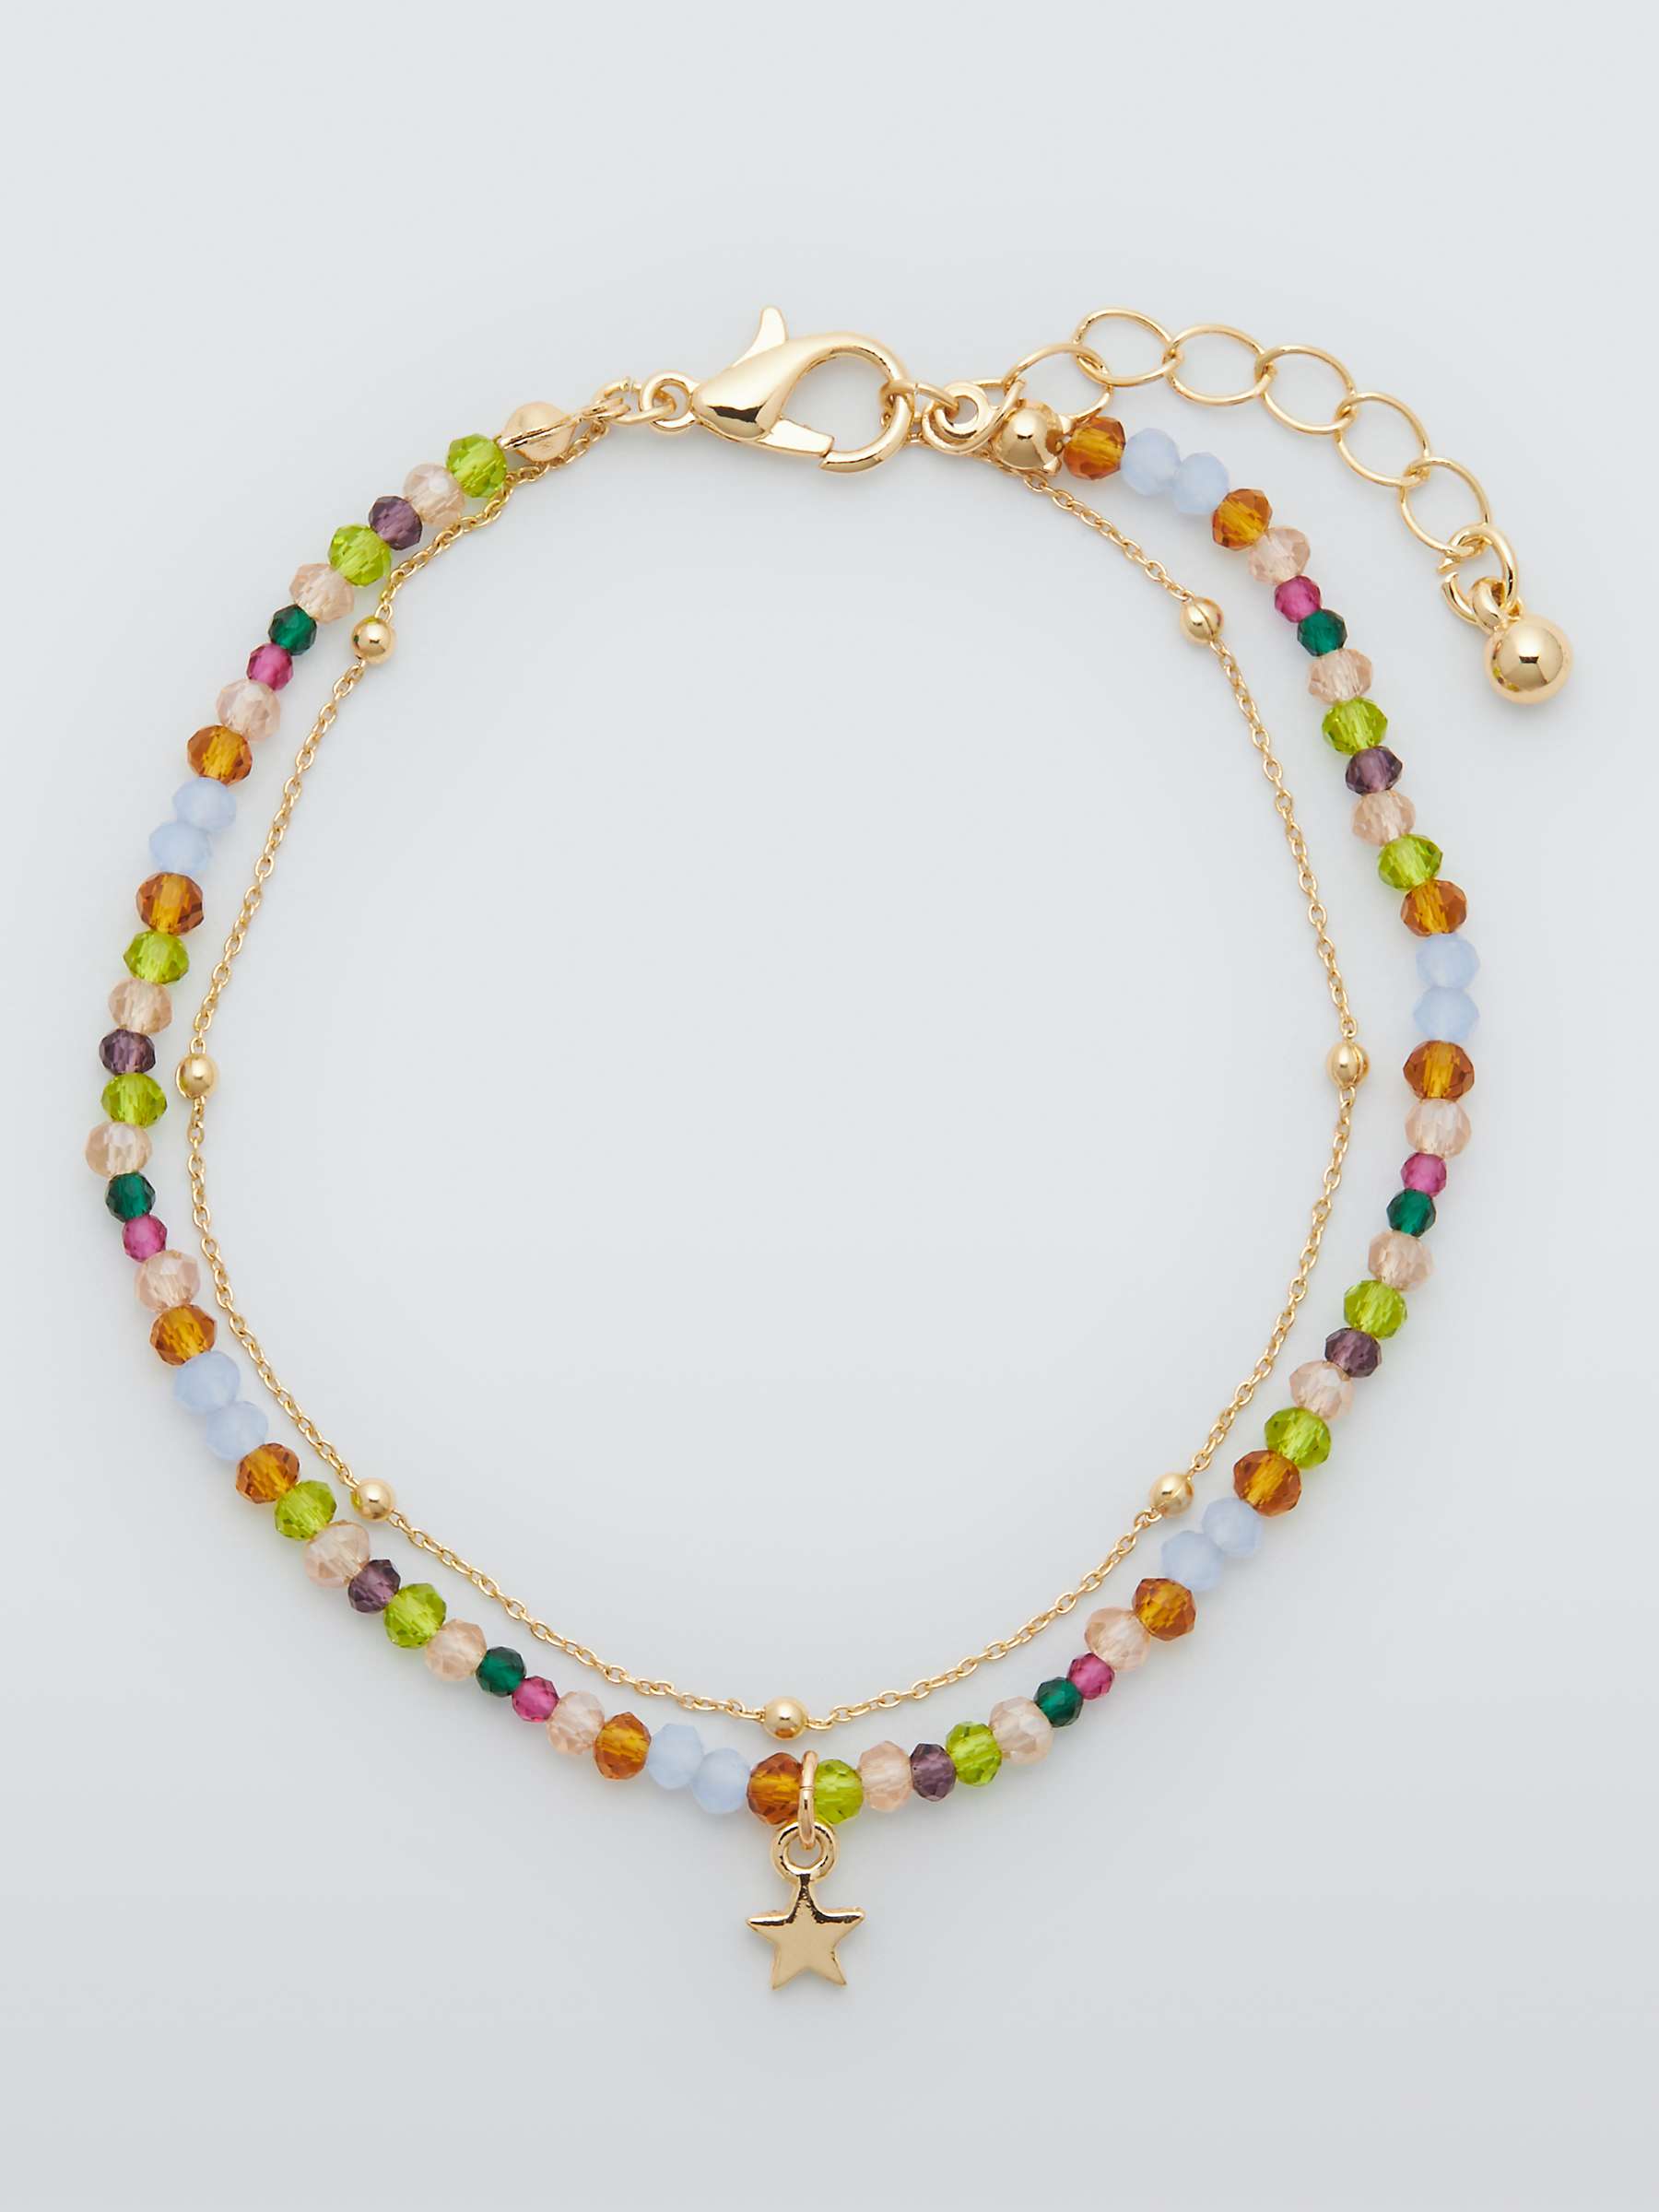 Buy John Lewis Double Row Bead and Chain Bracelet, Multi Online at johnlewis.com